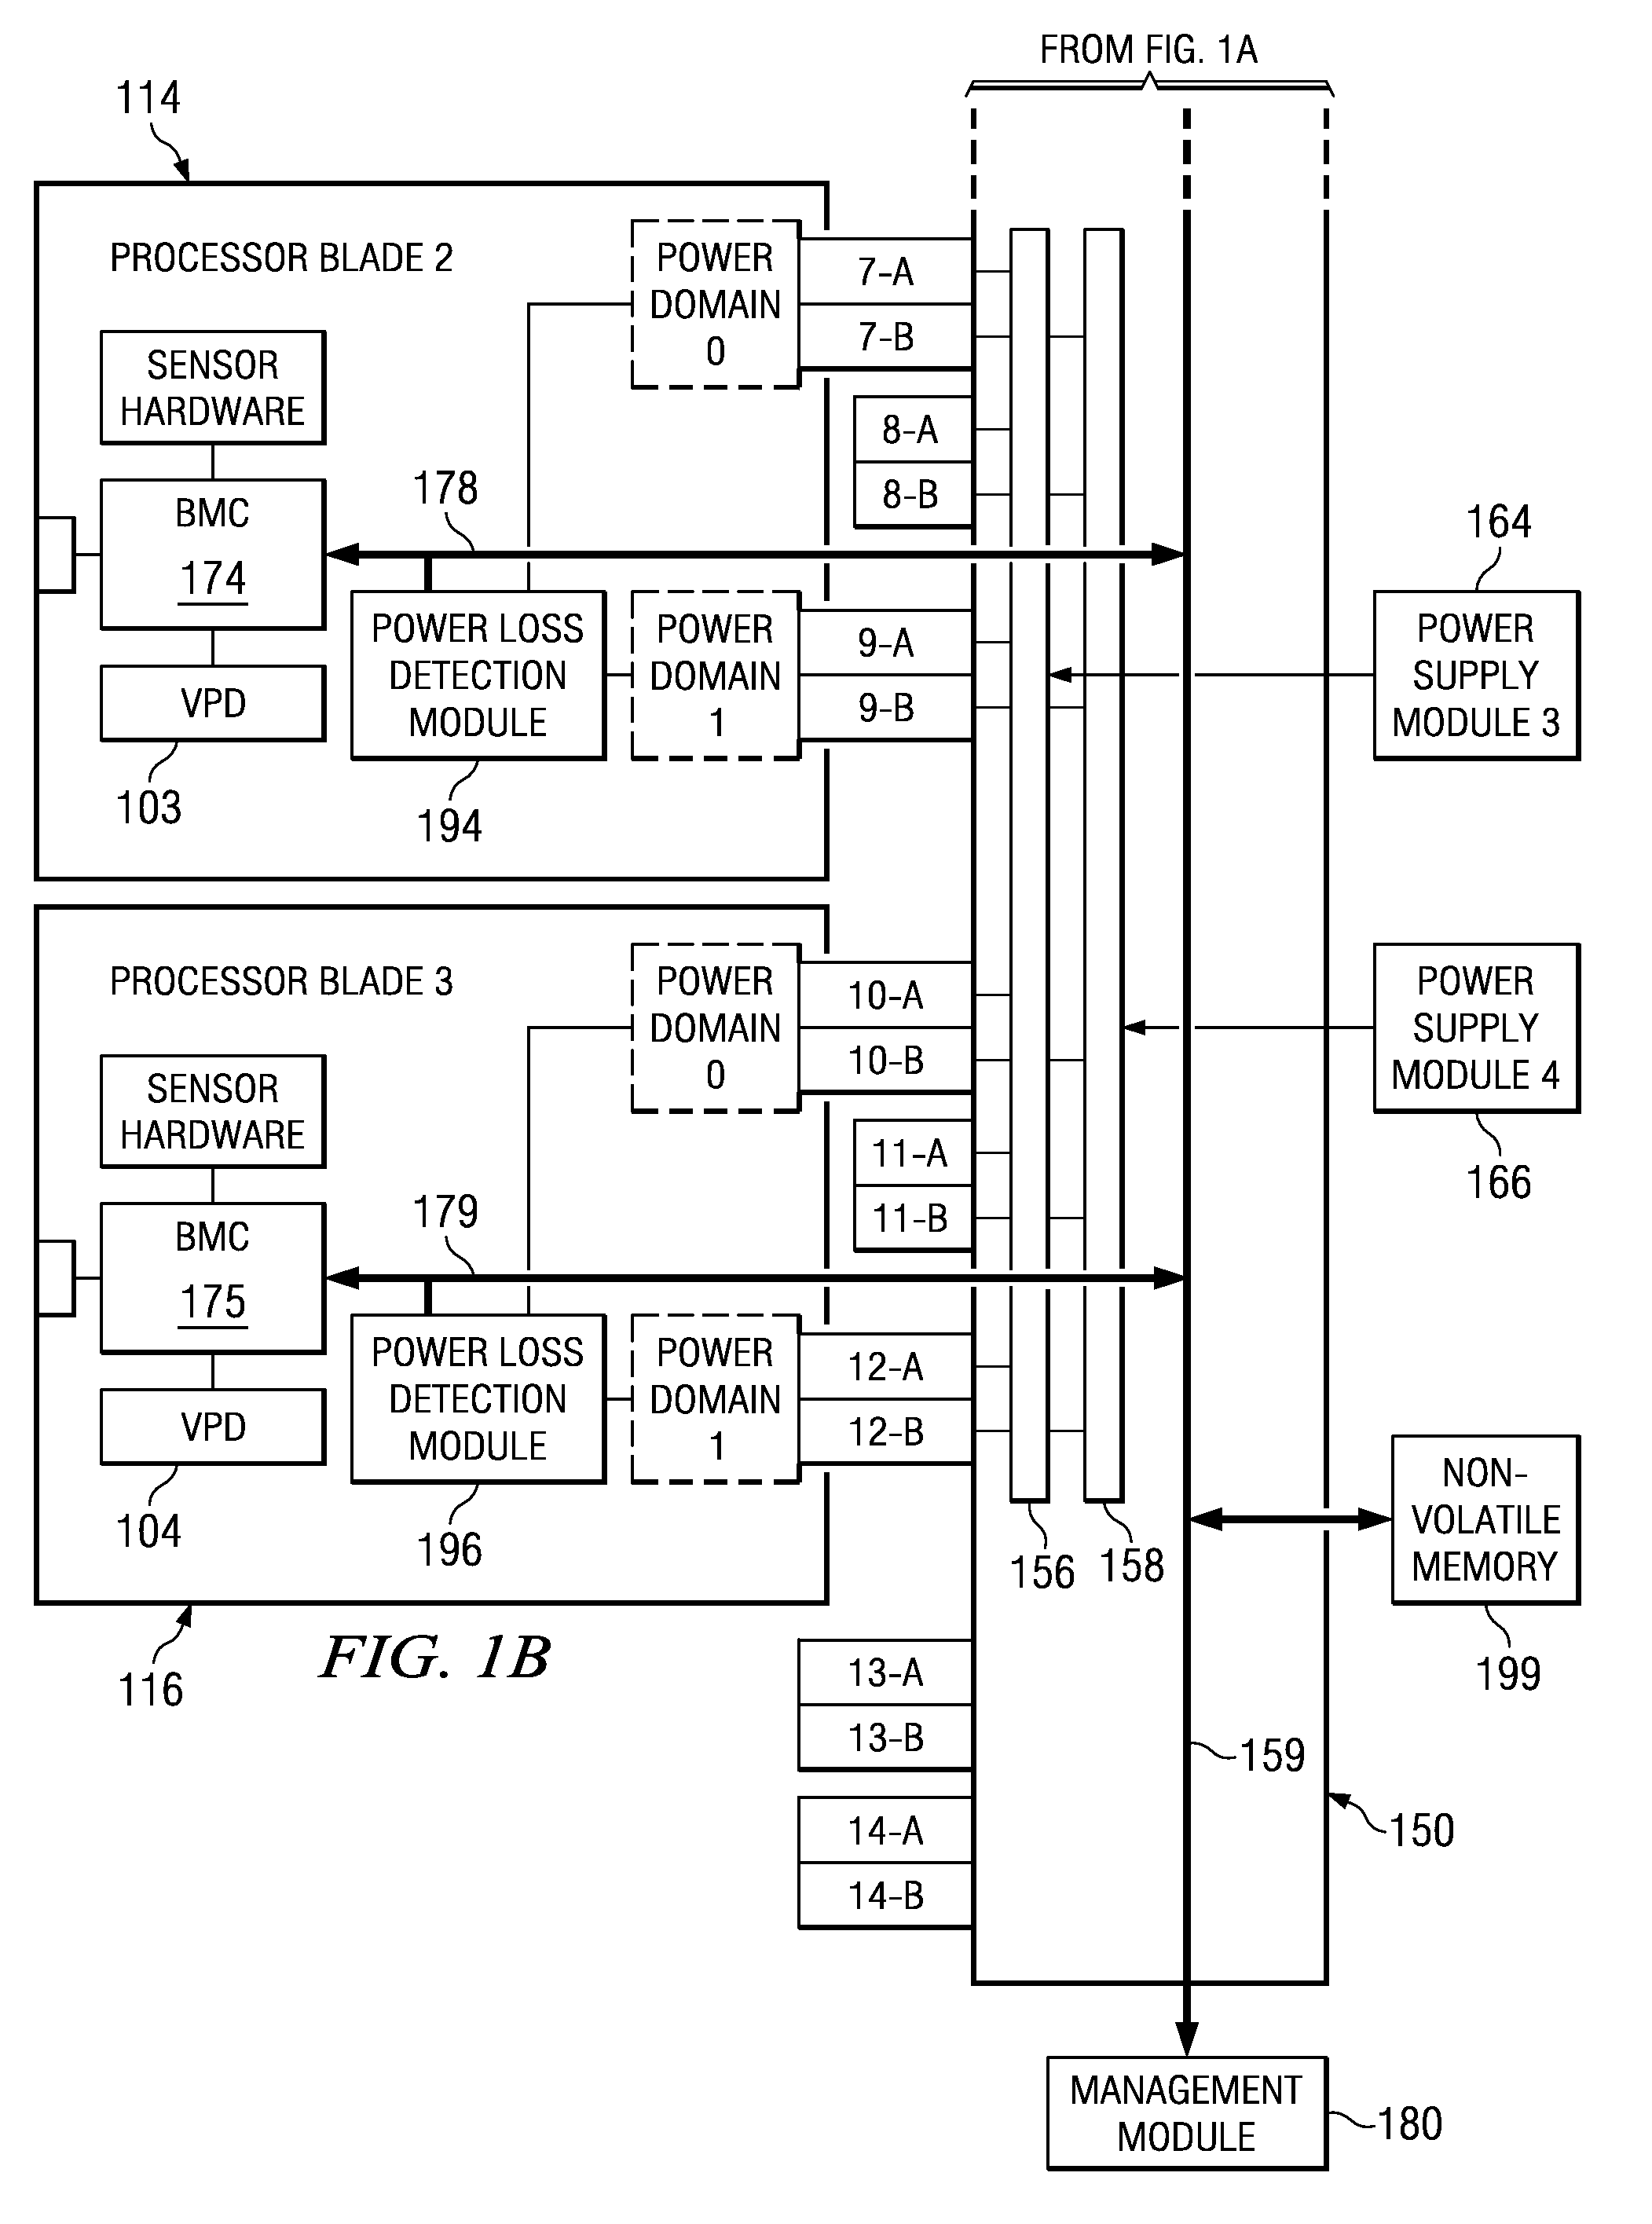 Thresholding system power loss notifications in a data processing system based on vital product data